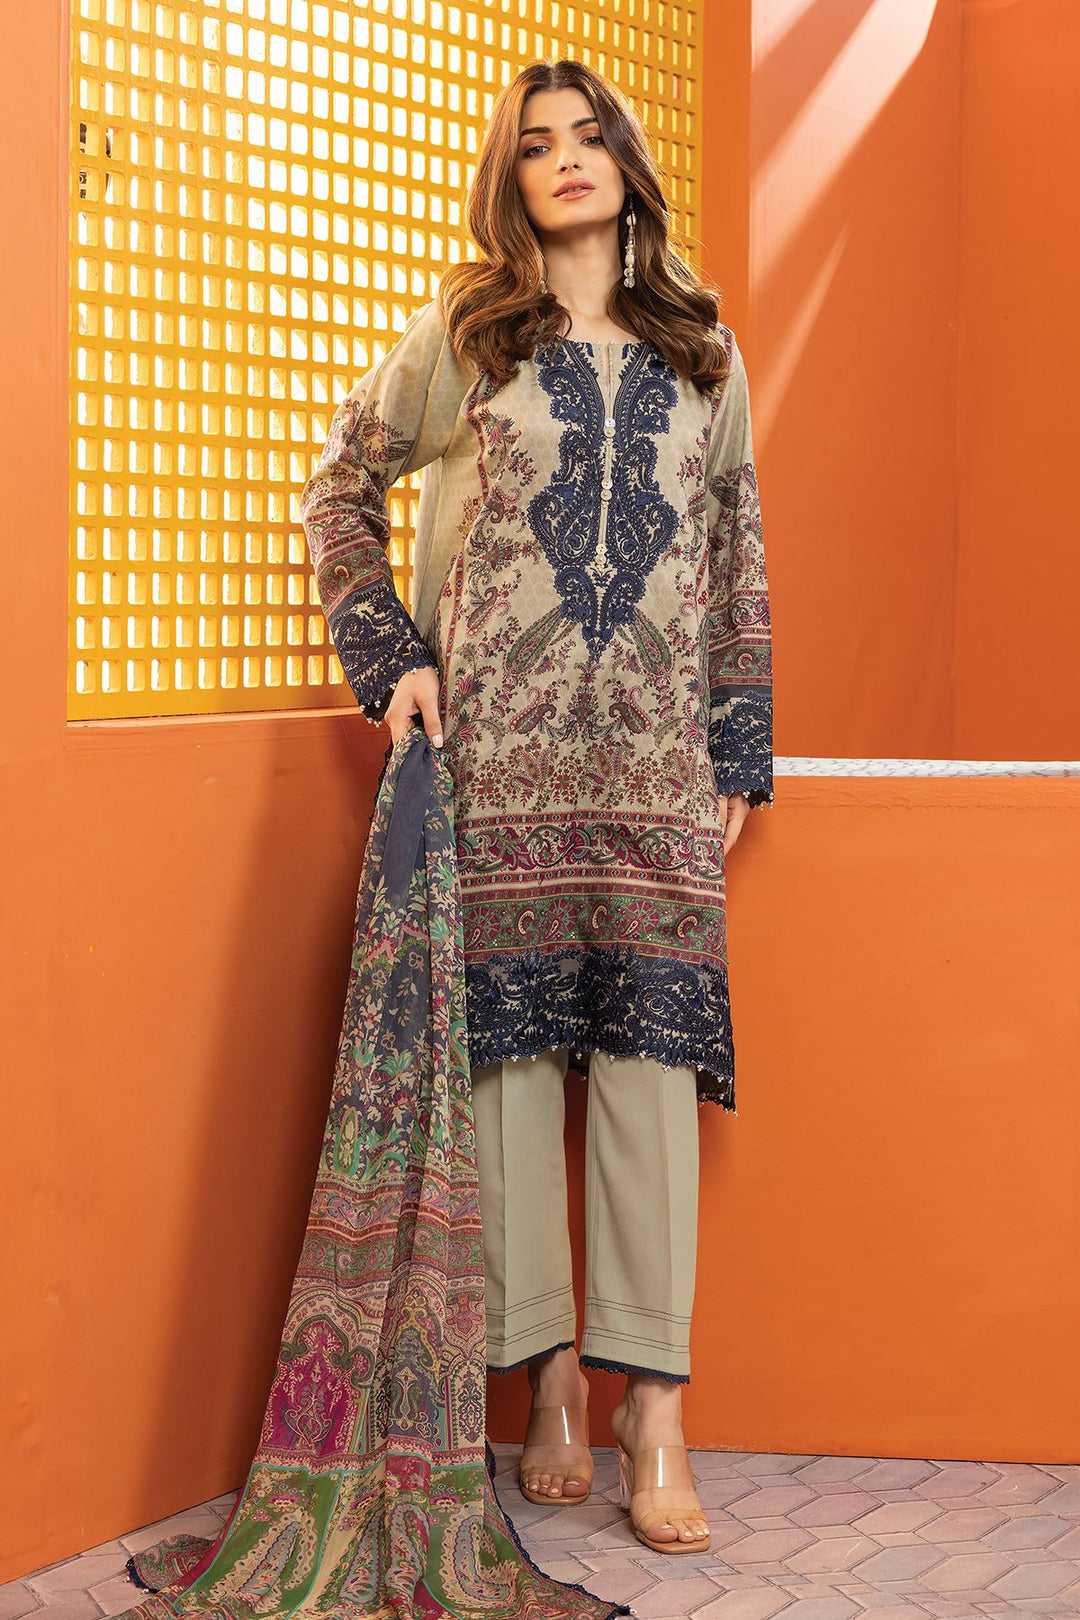 pakistani brands clothing a woman standing in front of an orange wall